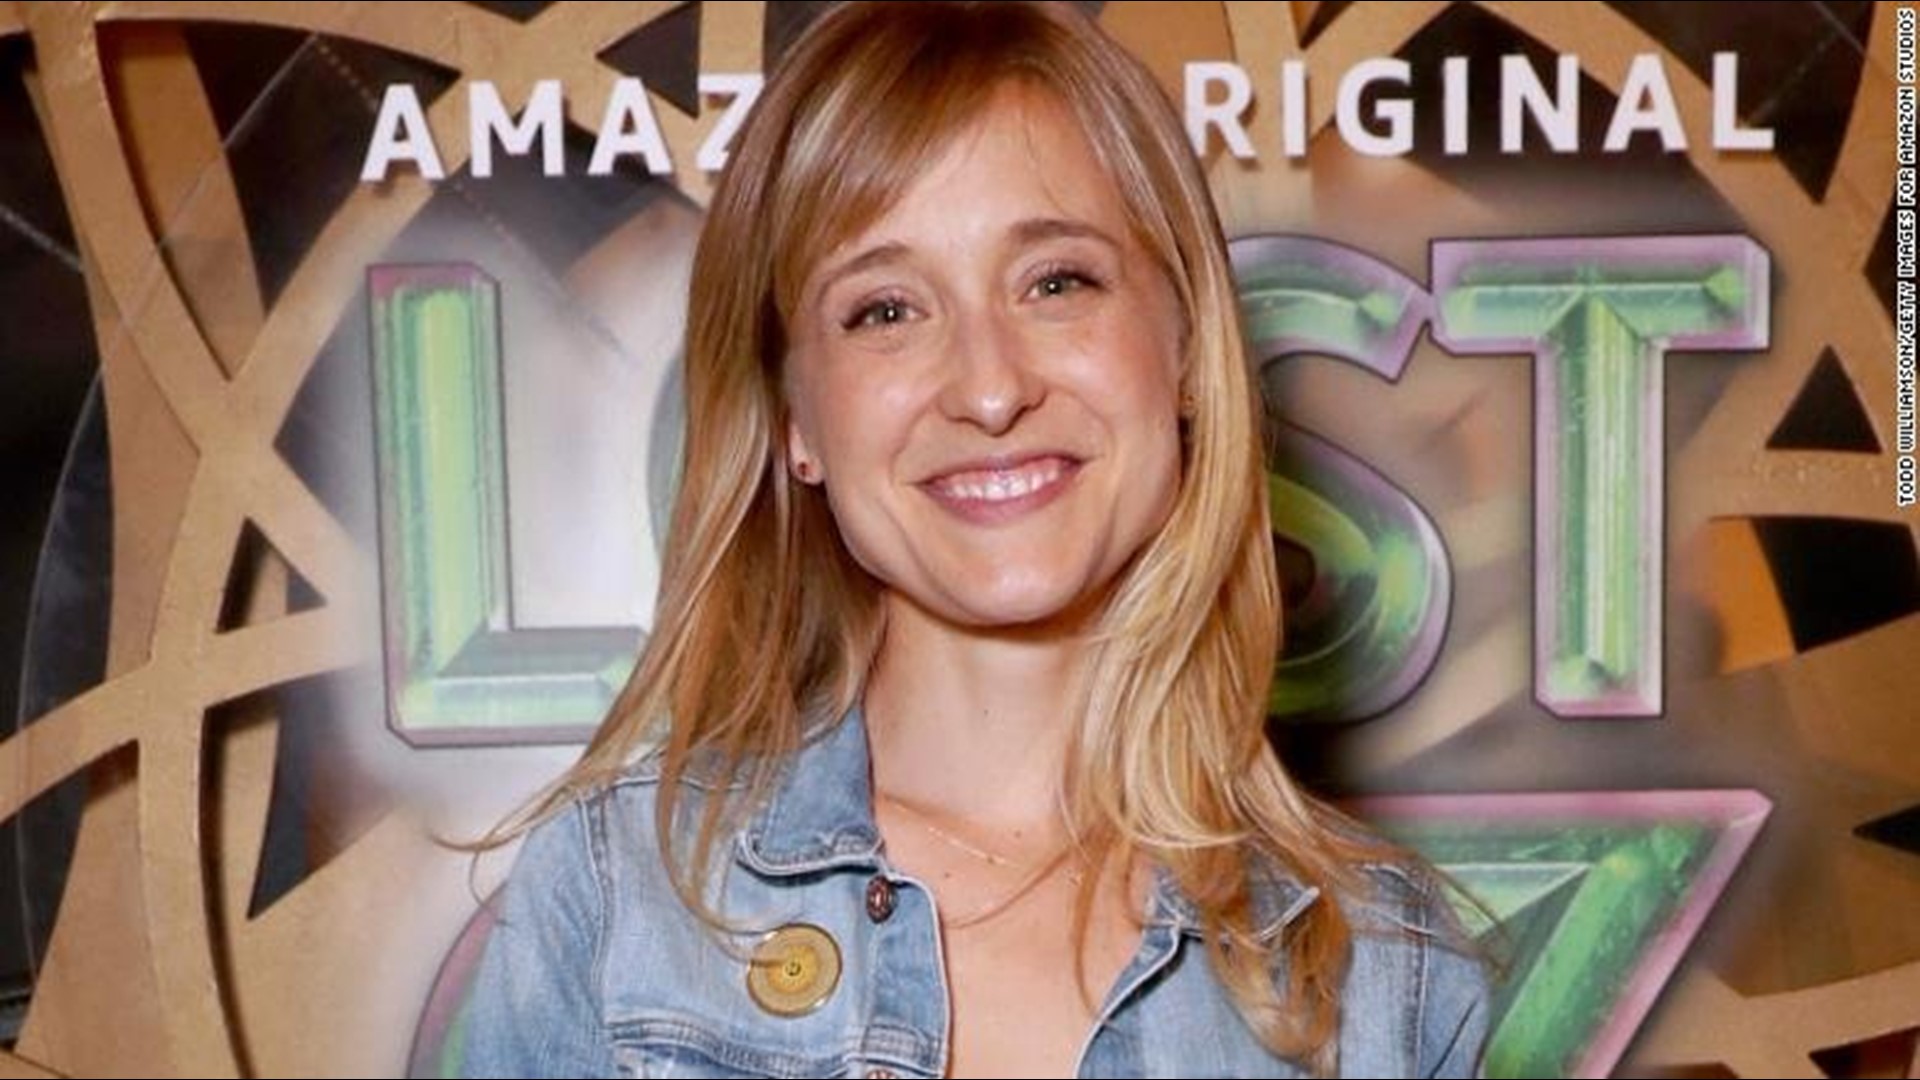 ‘smallville’ Actress Allison Mack Arrested For Alleged Role In Sex